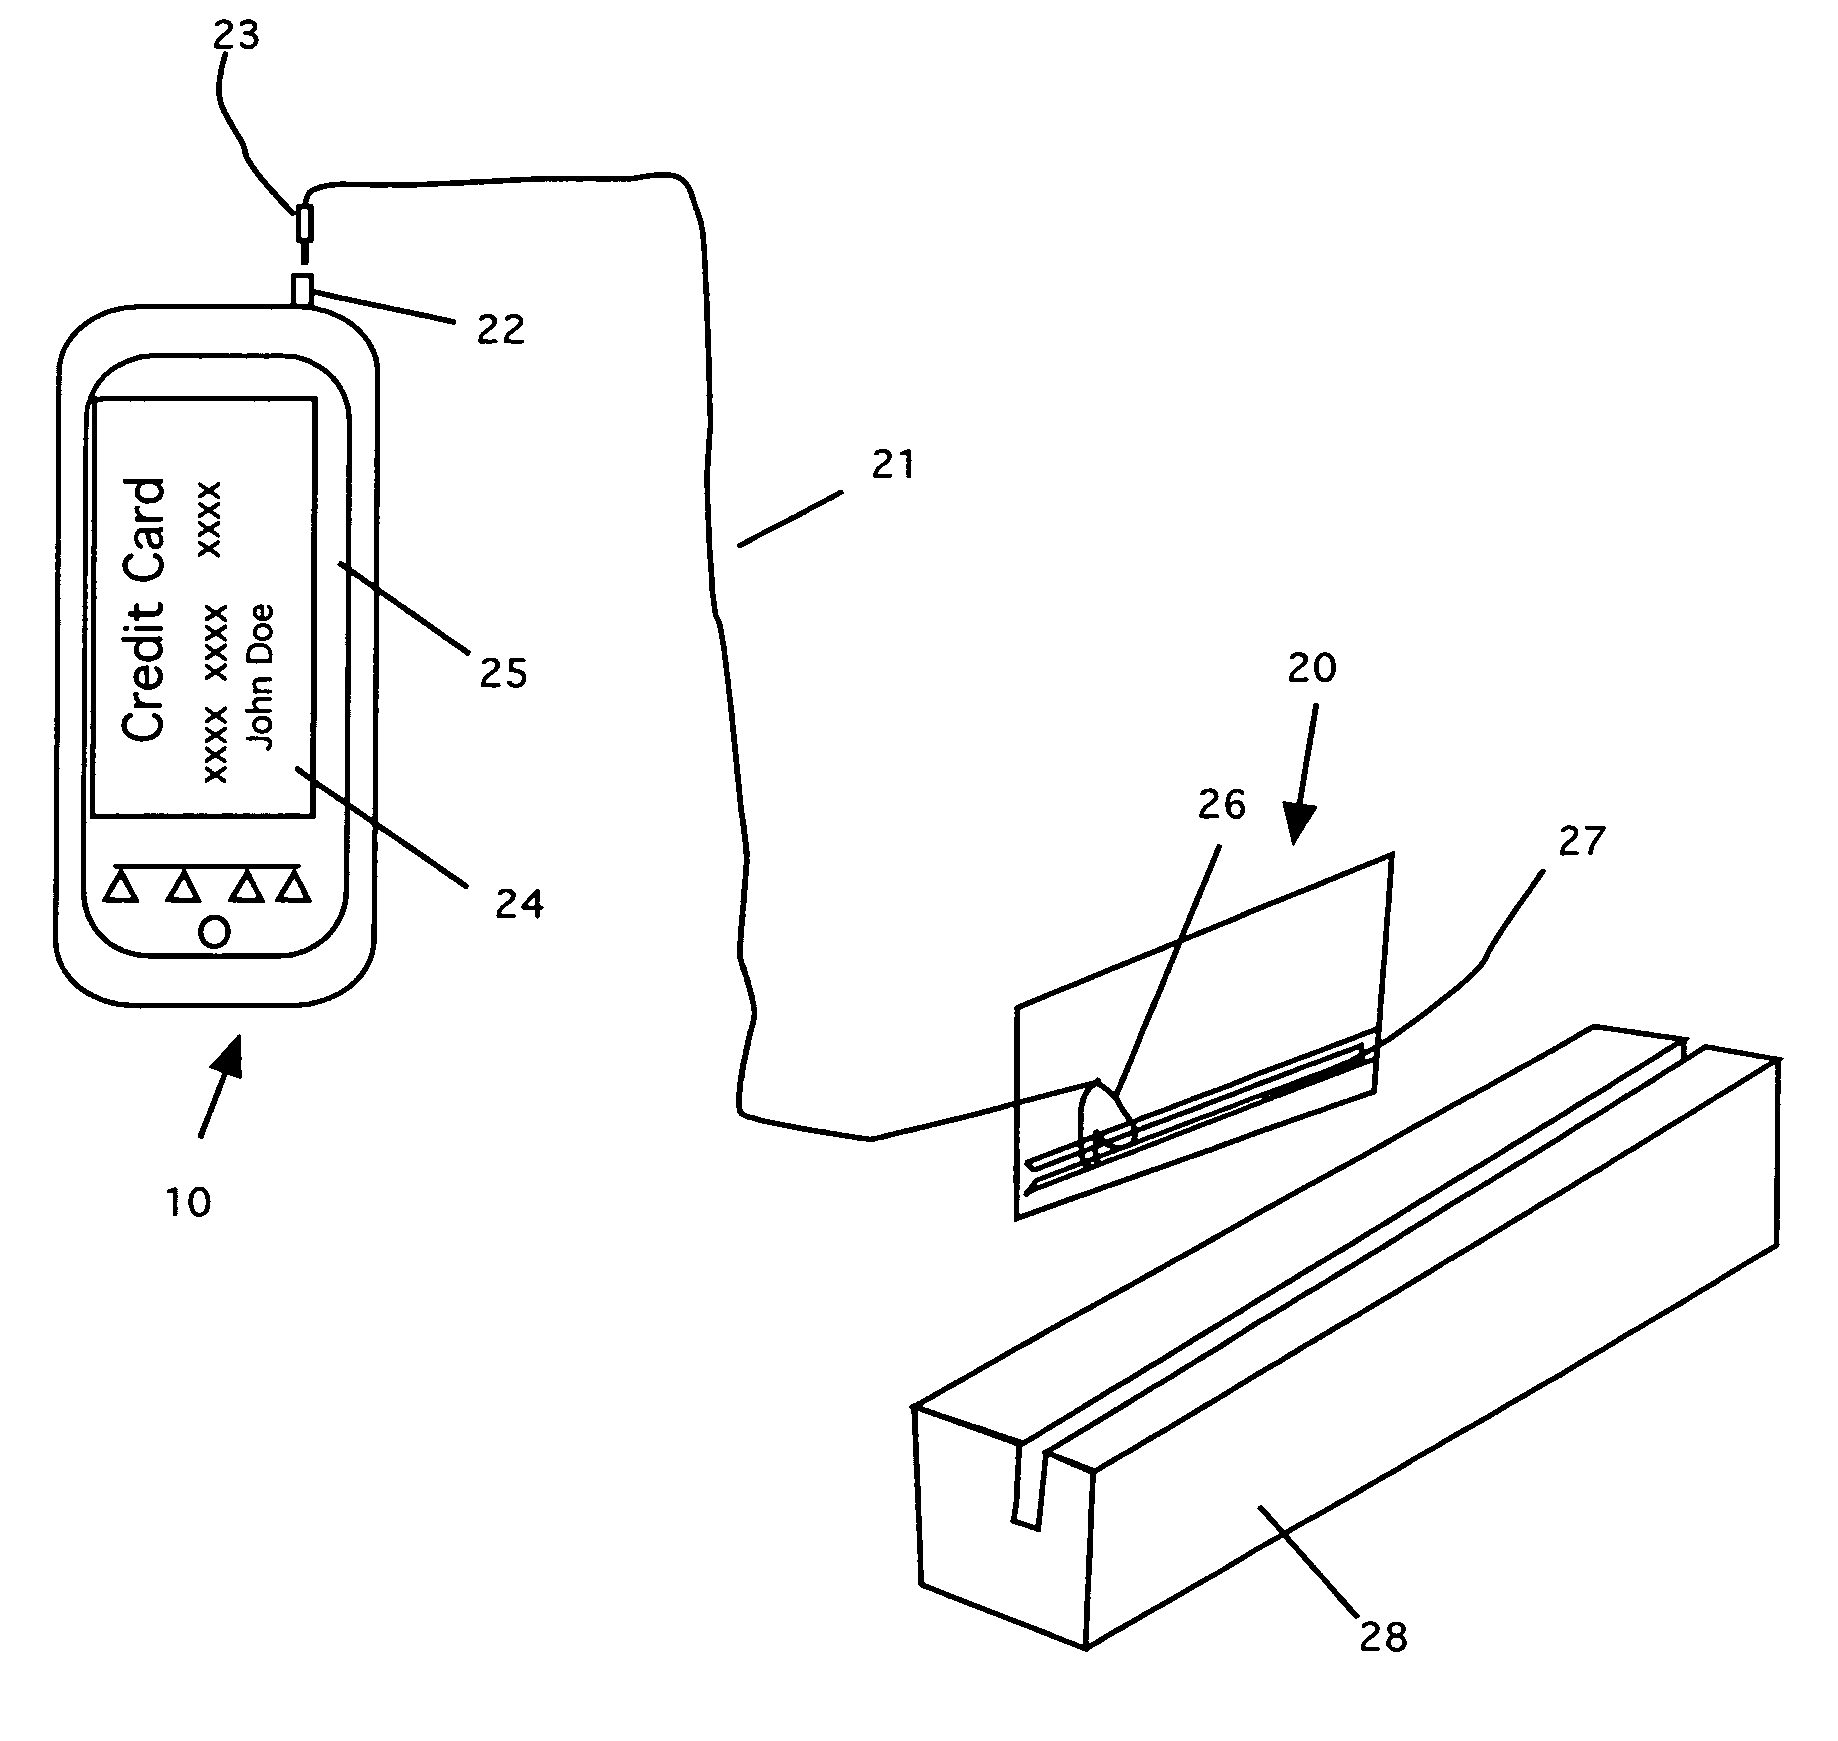 Method of use of a simulated magnetic stripe card system for use with magnetic stripe card reading terminals